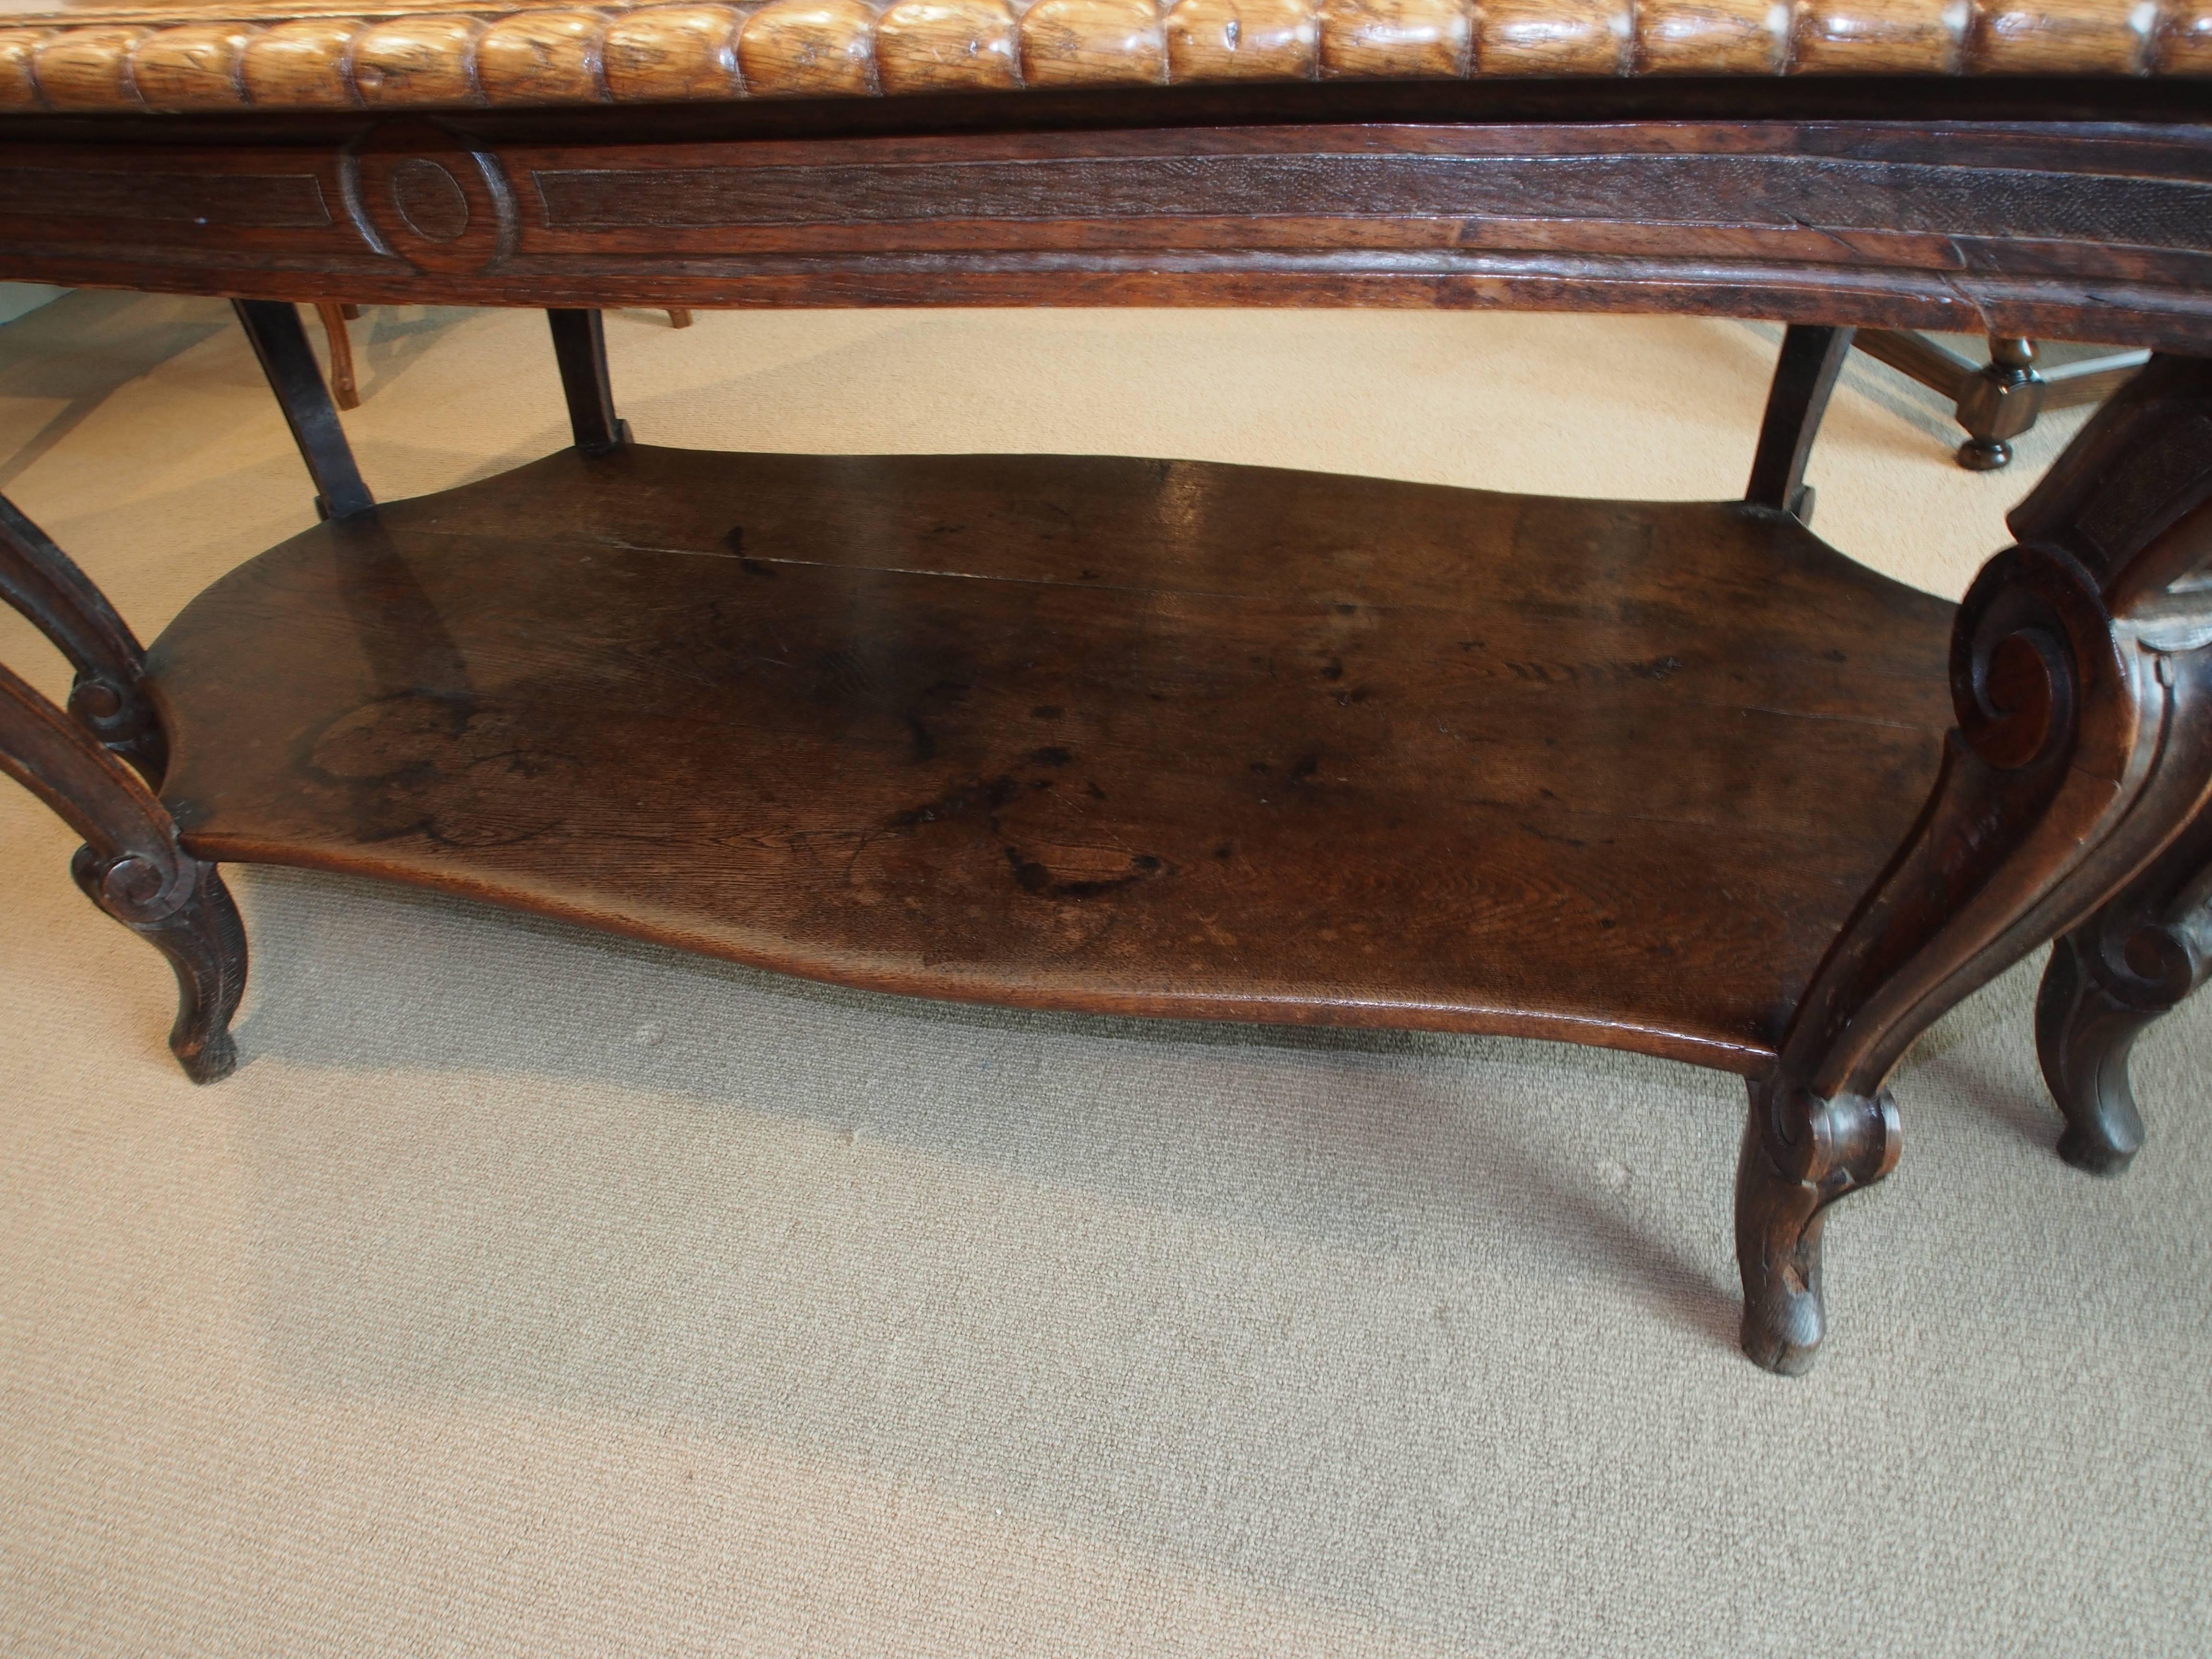 Italian Walnut Carved Table, 19th Century, with 8 Curved Legs and Low Shelf For Sale 1